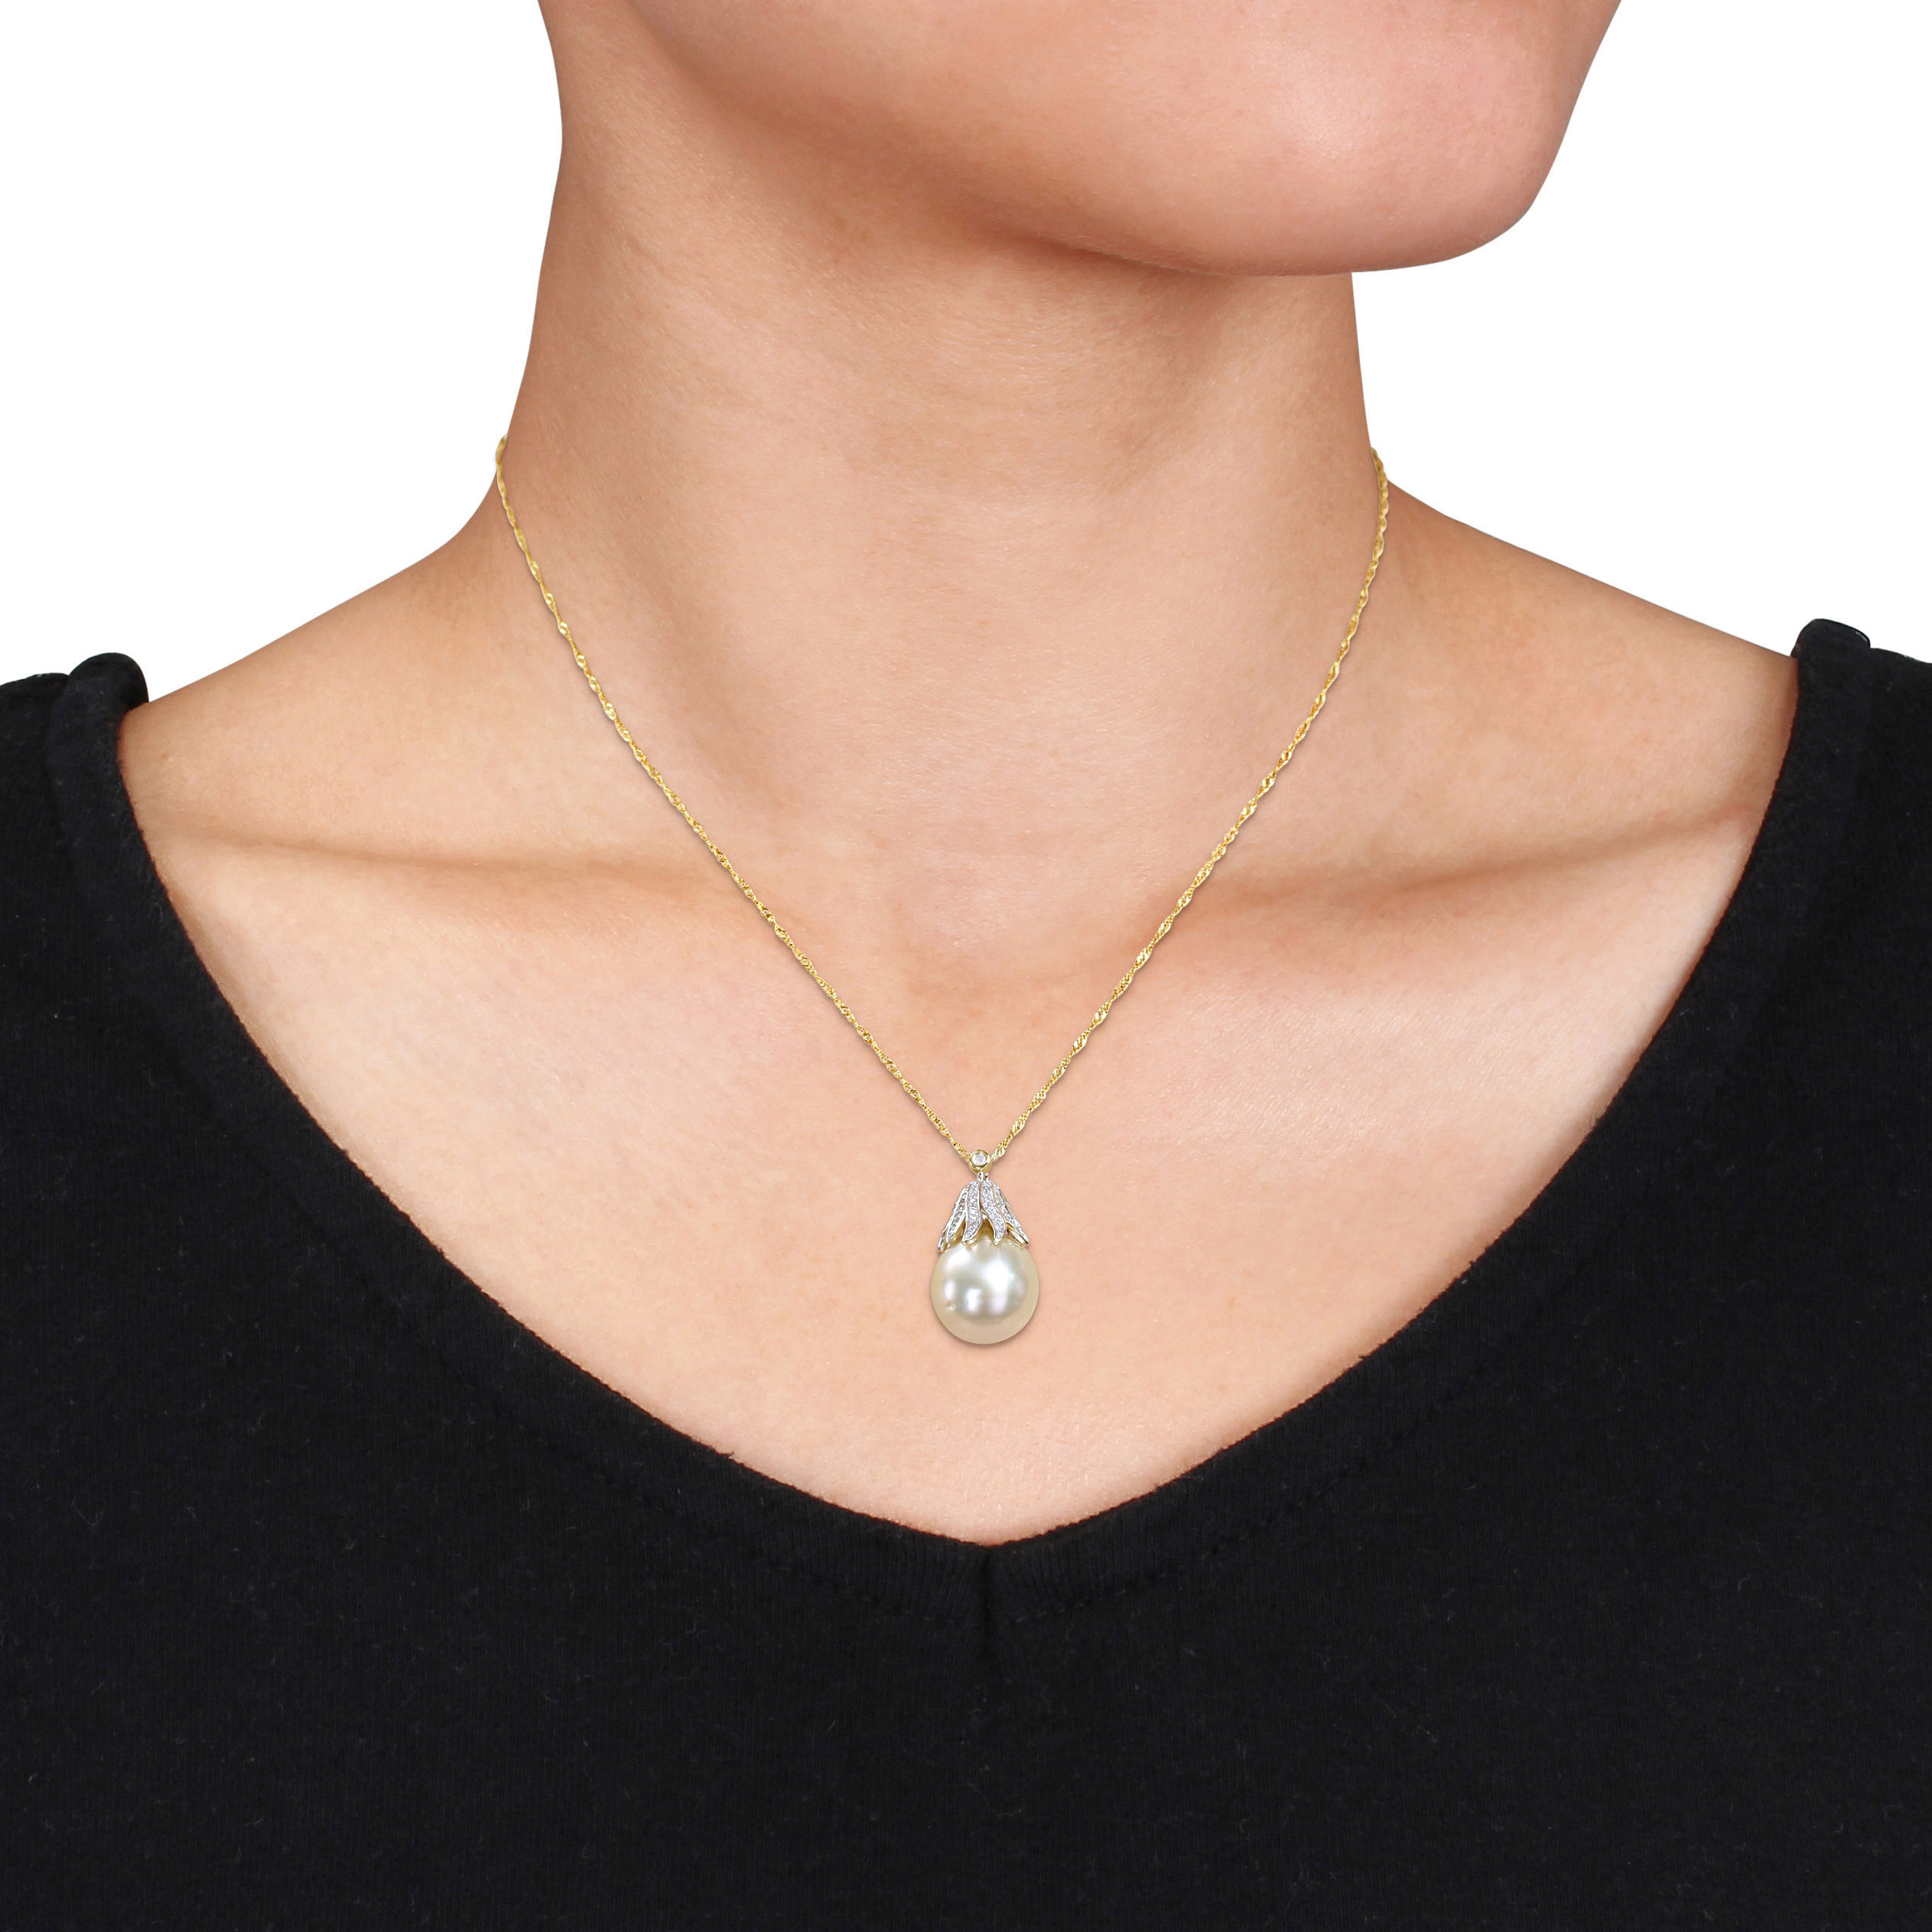 10-11 MM South Sea Cultured Pearl and Diamond Accent Pendant with Chain in 14k Yellow Gold - 17 in.